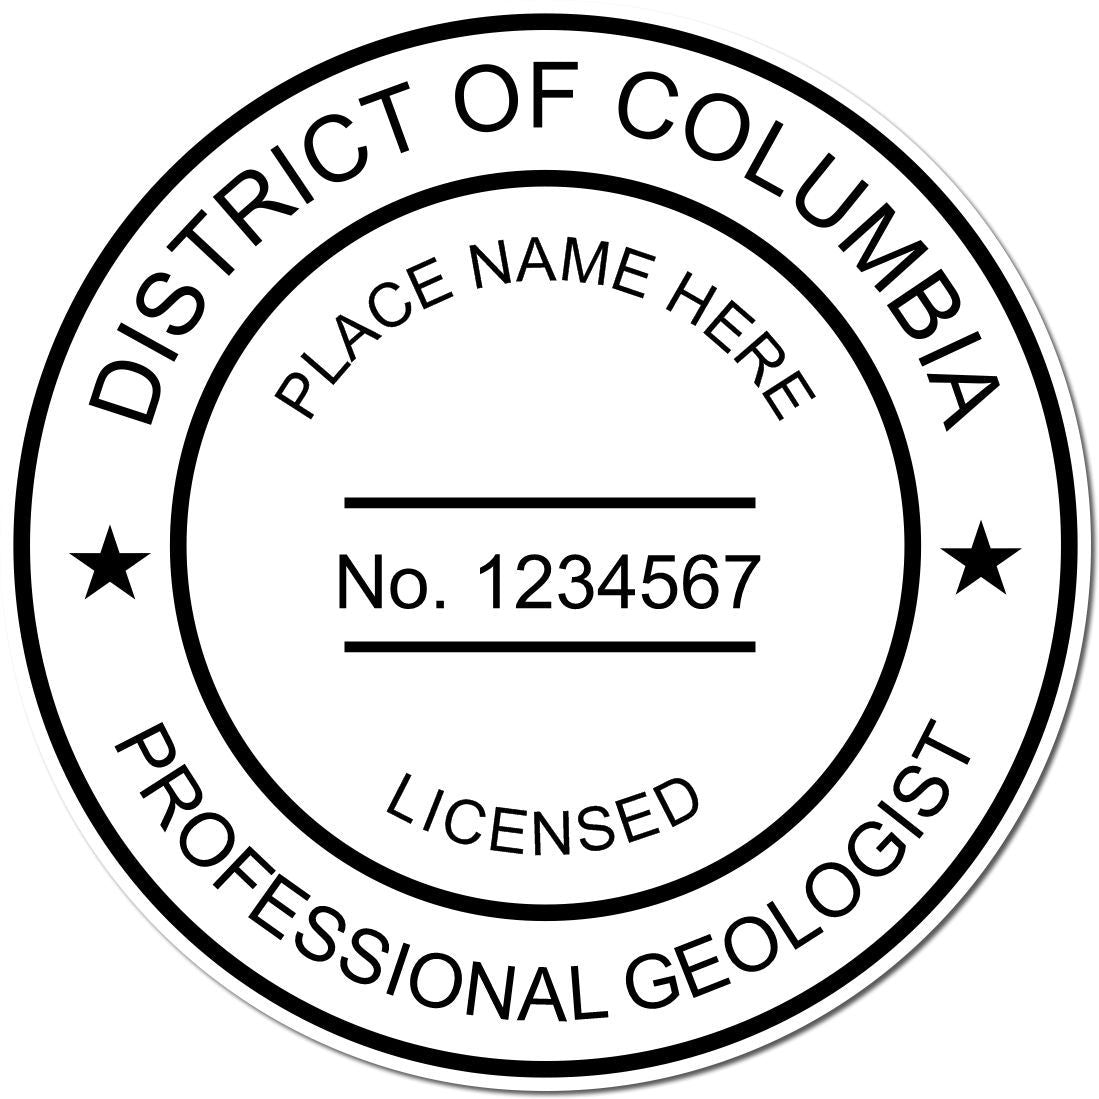 This paper is stamped with a sample imprint of the Slim Pre-Inked District of Columbia Professional Geologist Seal Stamp, signifying its quality and reliability.